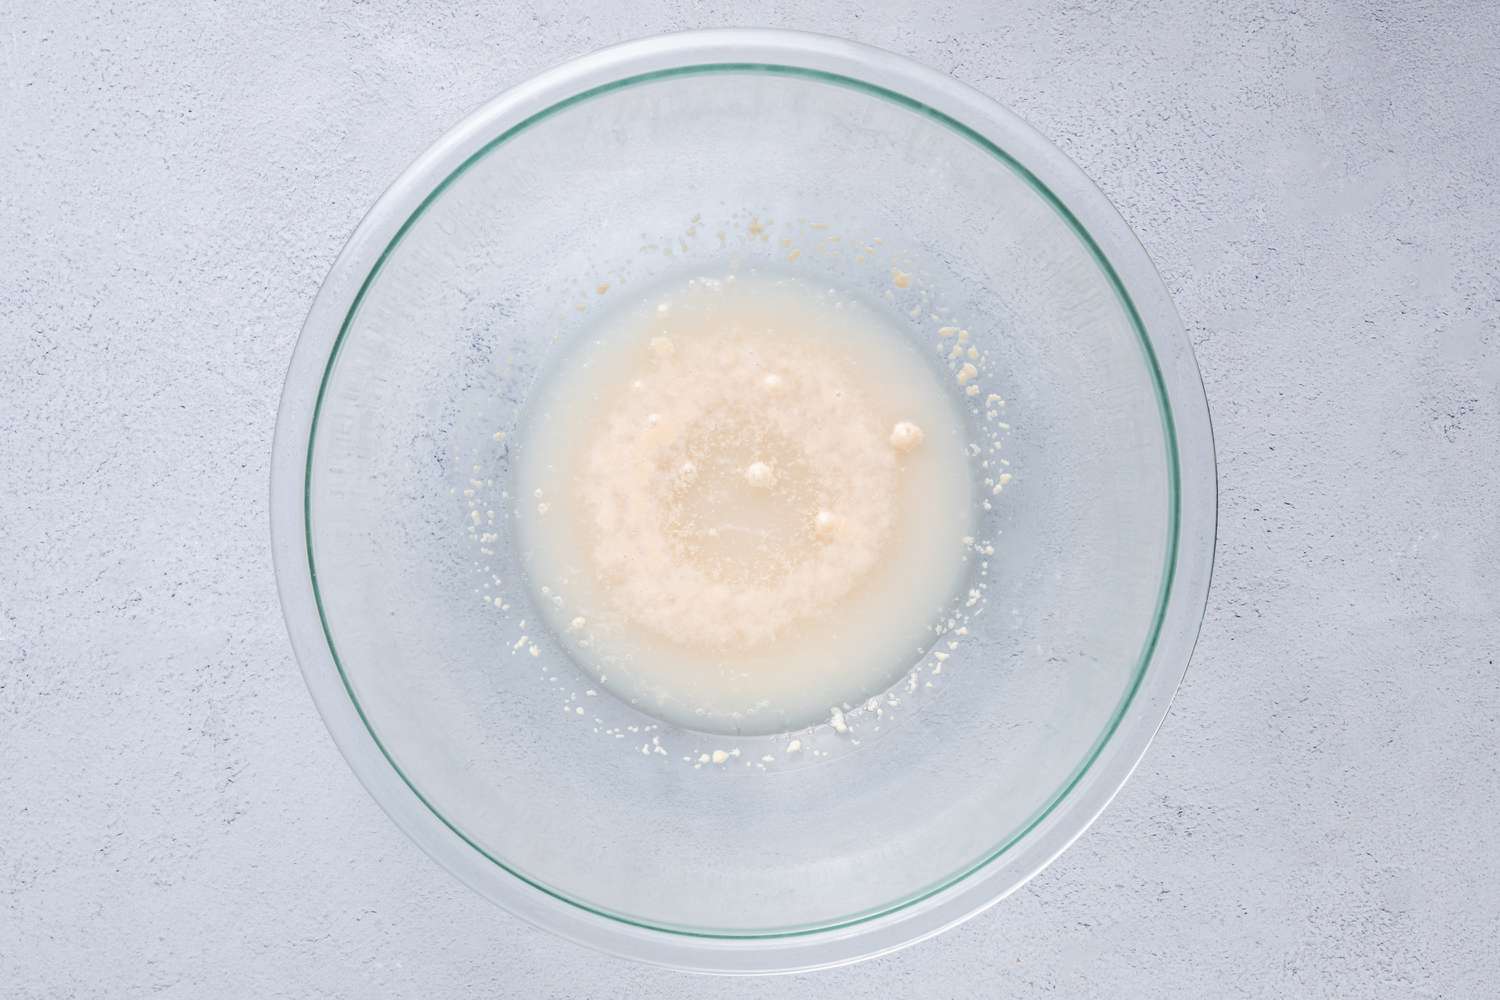 Water, sugar, and yeast in a large bowl